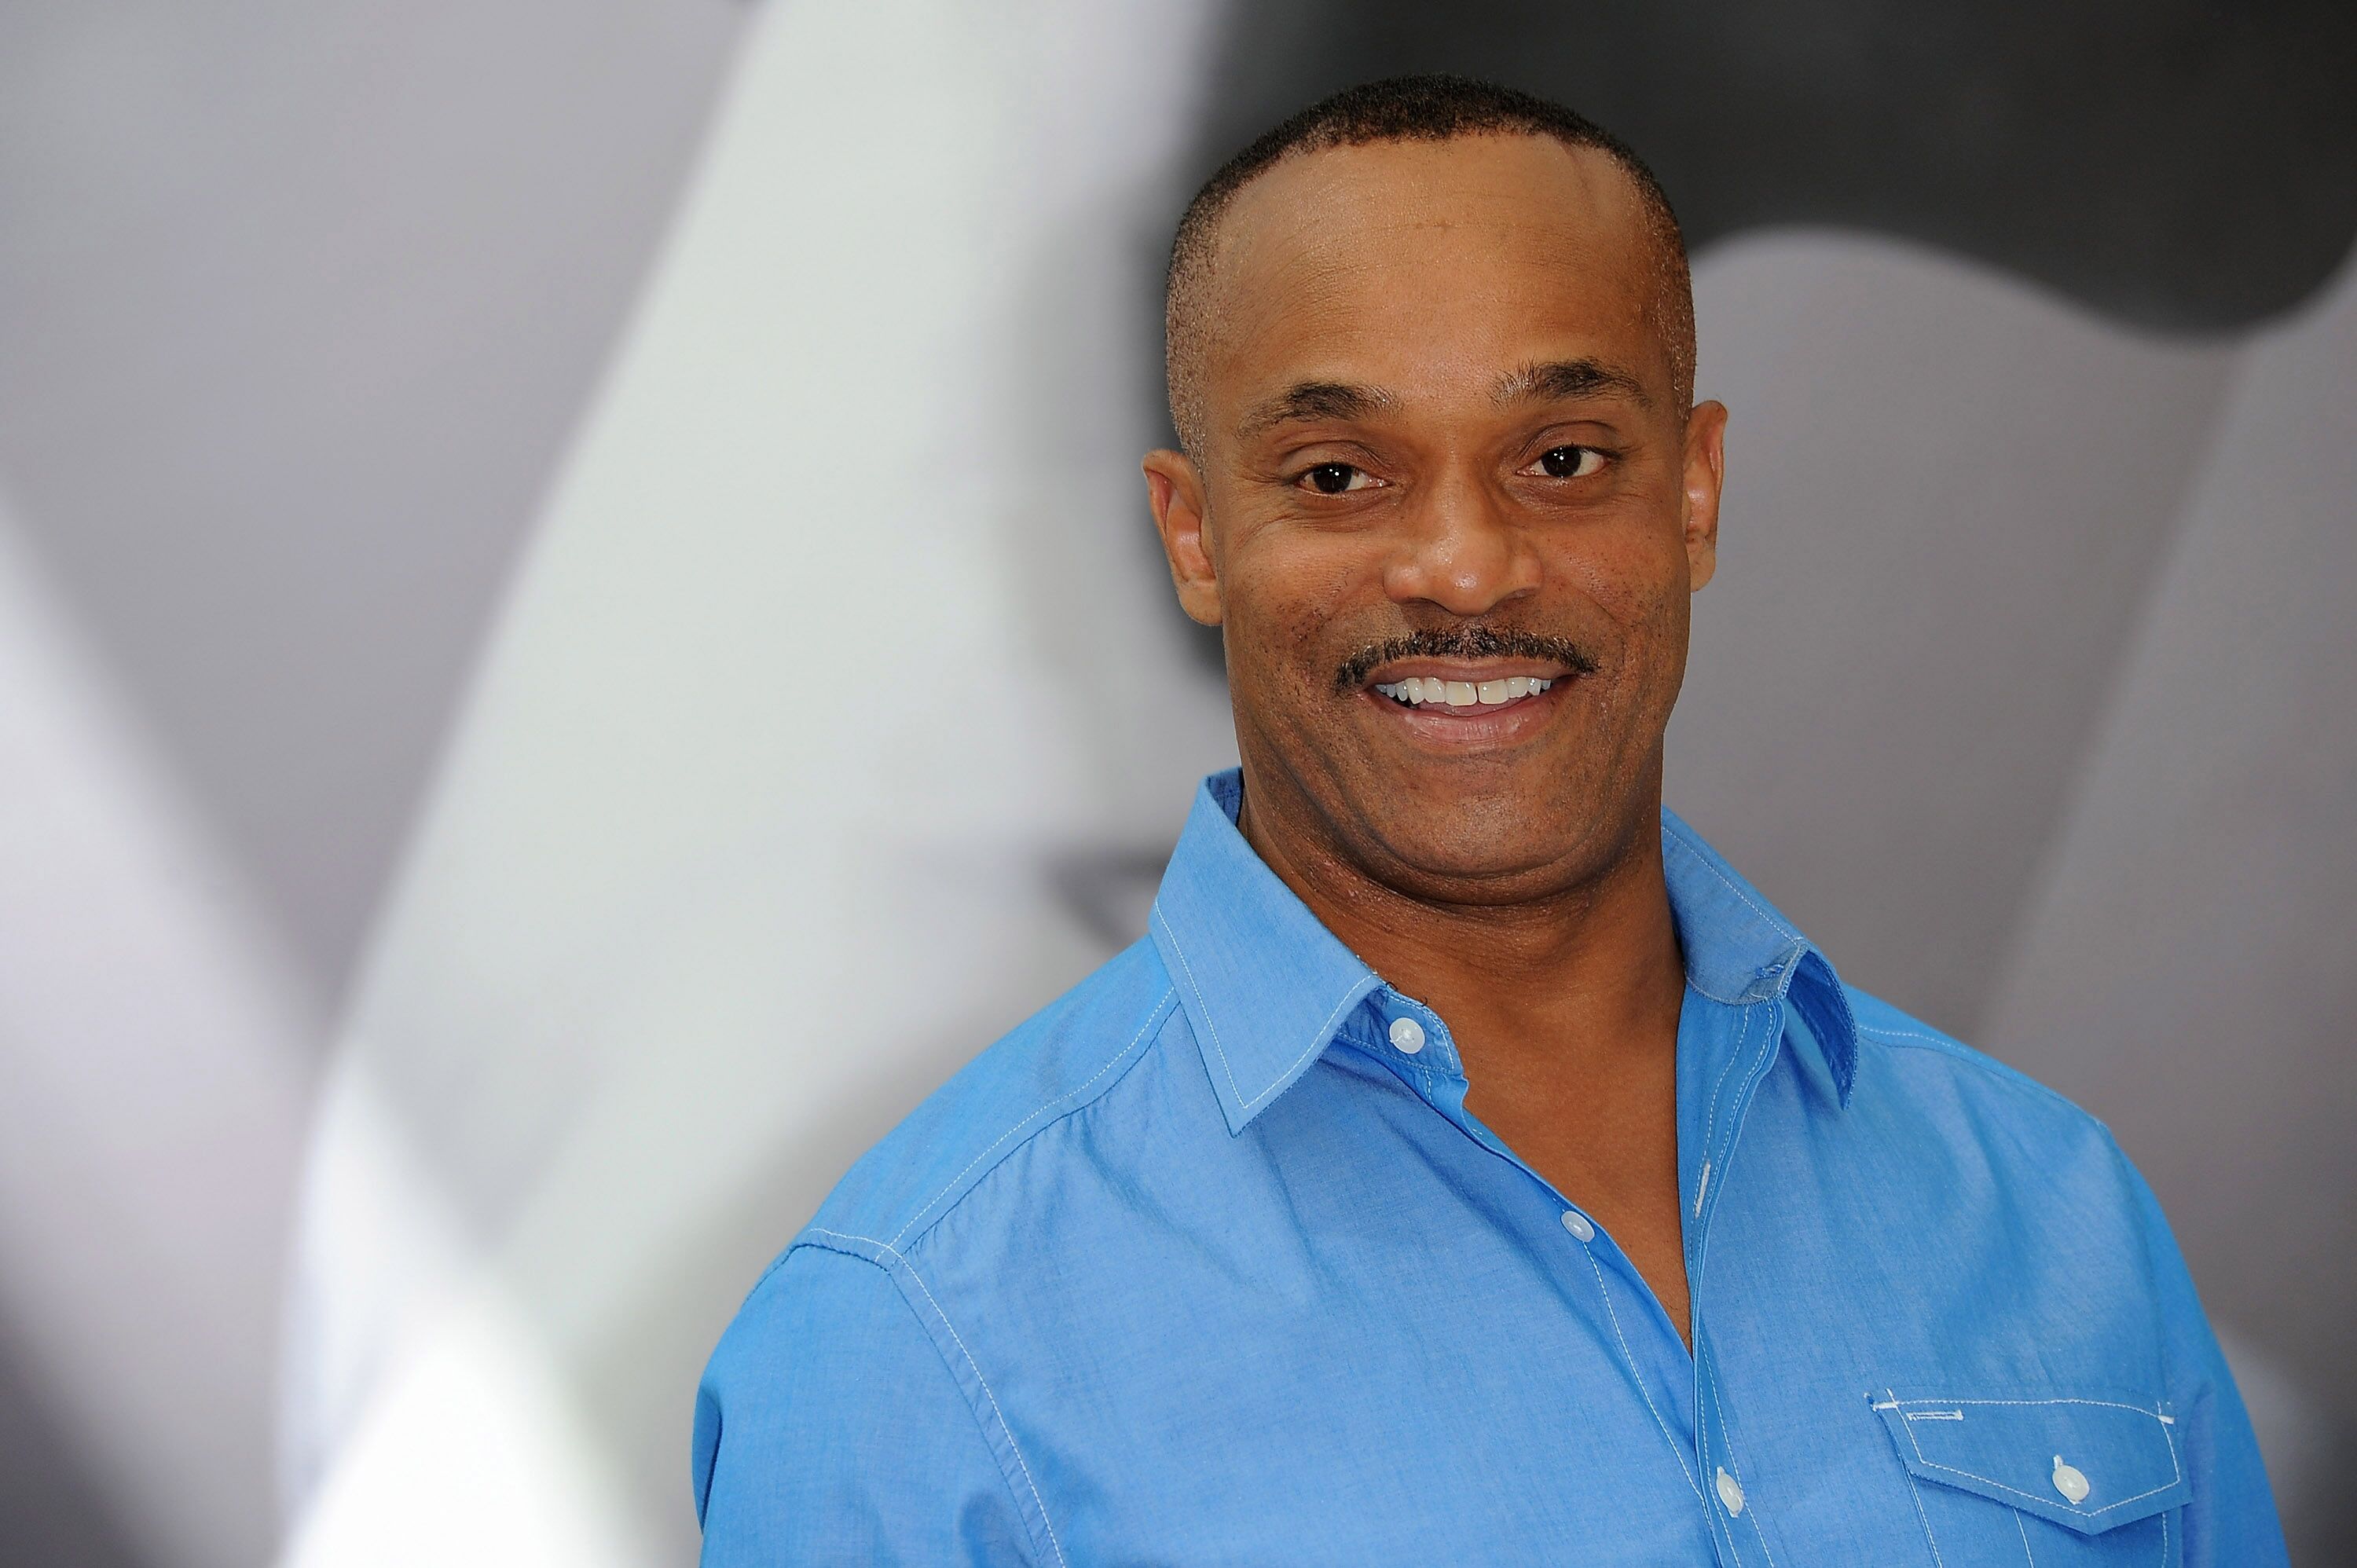 Actor Rocky Carroll attends a photocall for the TV Series 'NCIS: Naval Criminal Investigative Service' during the 52nd Monte Carlo TV Festival on June 12, 2012 in Monte-Carlo, Monaco | Photo: Getty Images